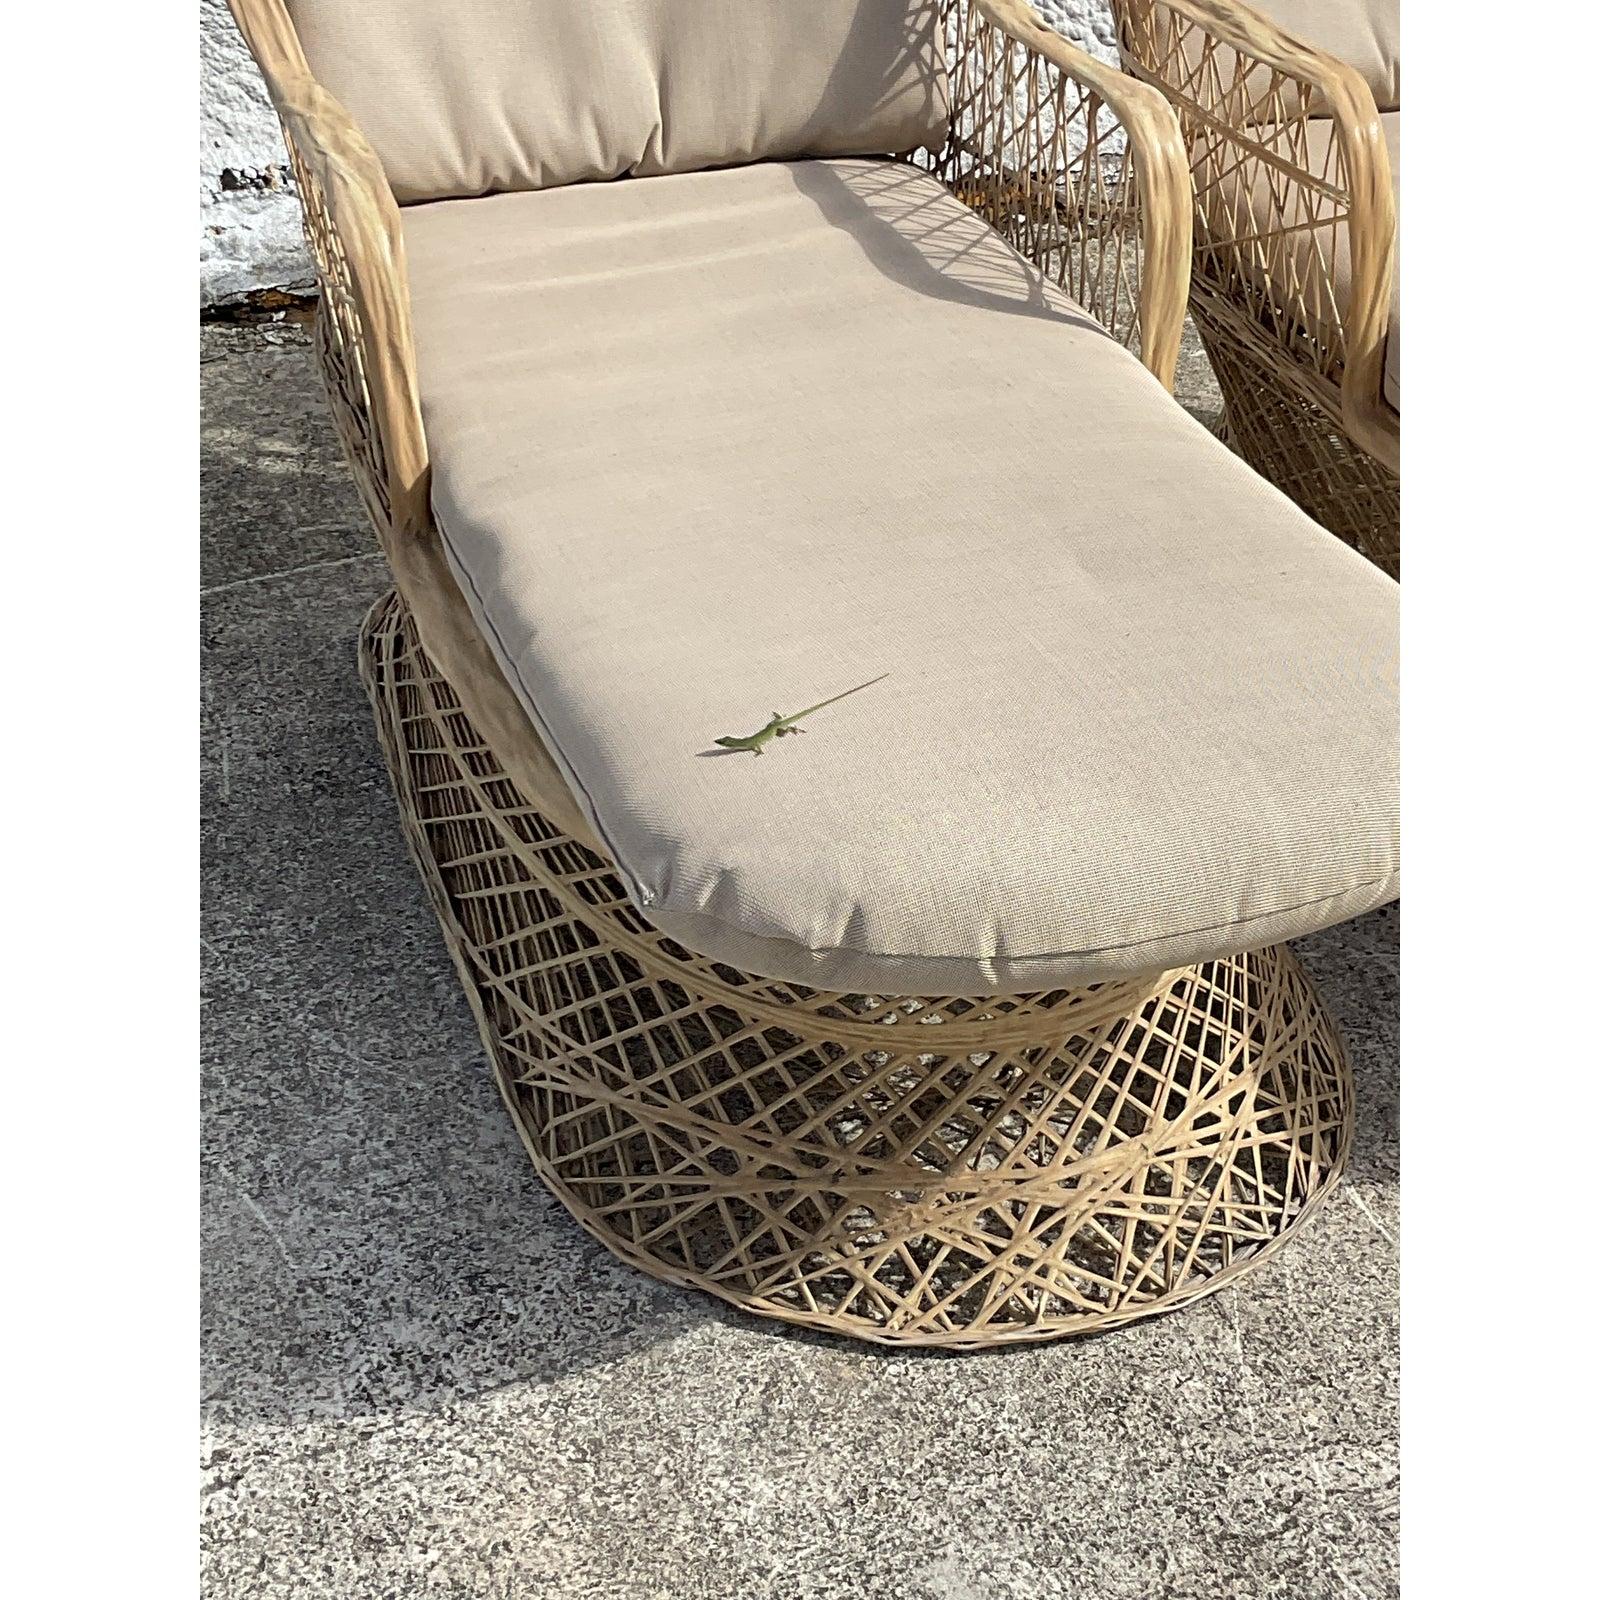 Fantastic pair of vintage spun fiberglass chaise lounge chairs. Made by the iconic Russell Woodard. Done in a pale fawn color with an color coordinated cushion. Unmarked. Acquired from a Palm Beach estate.